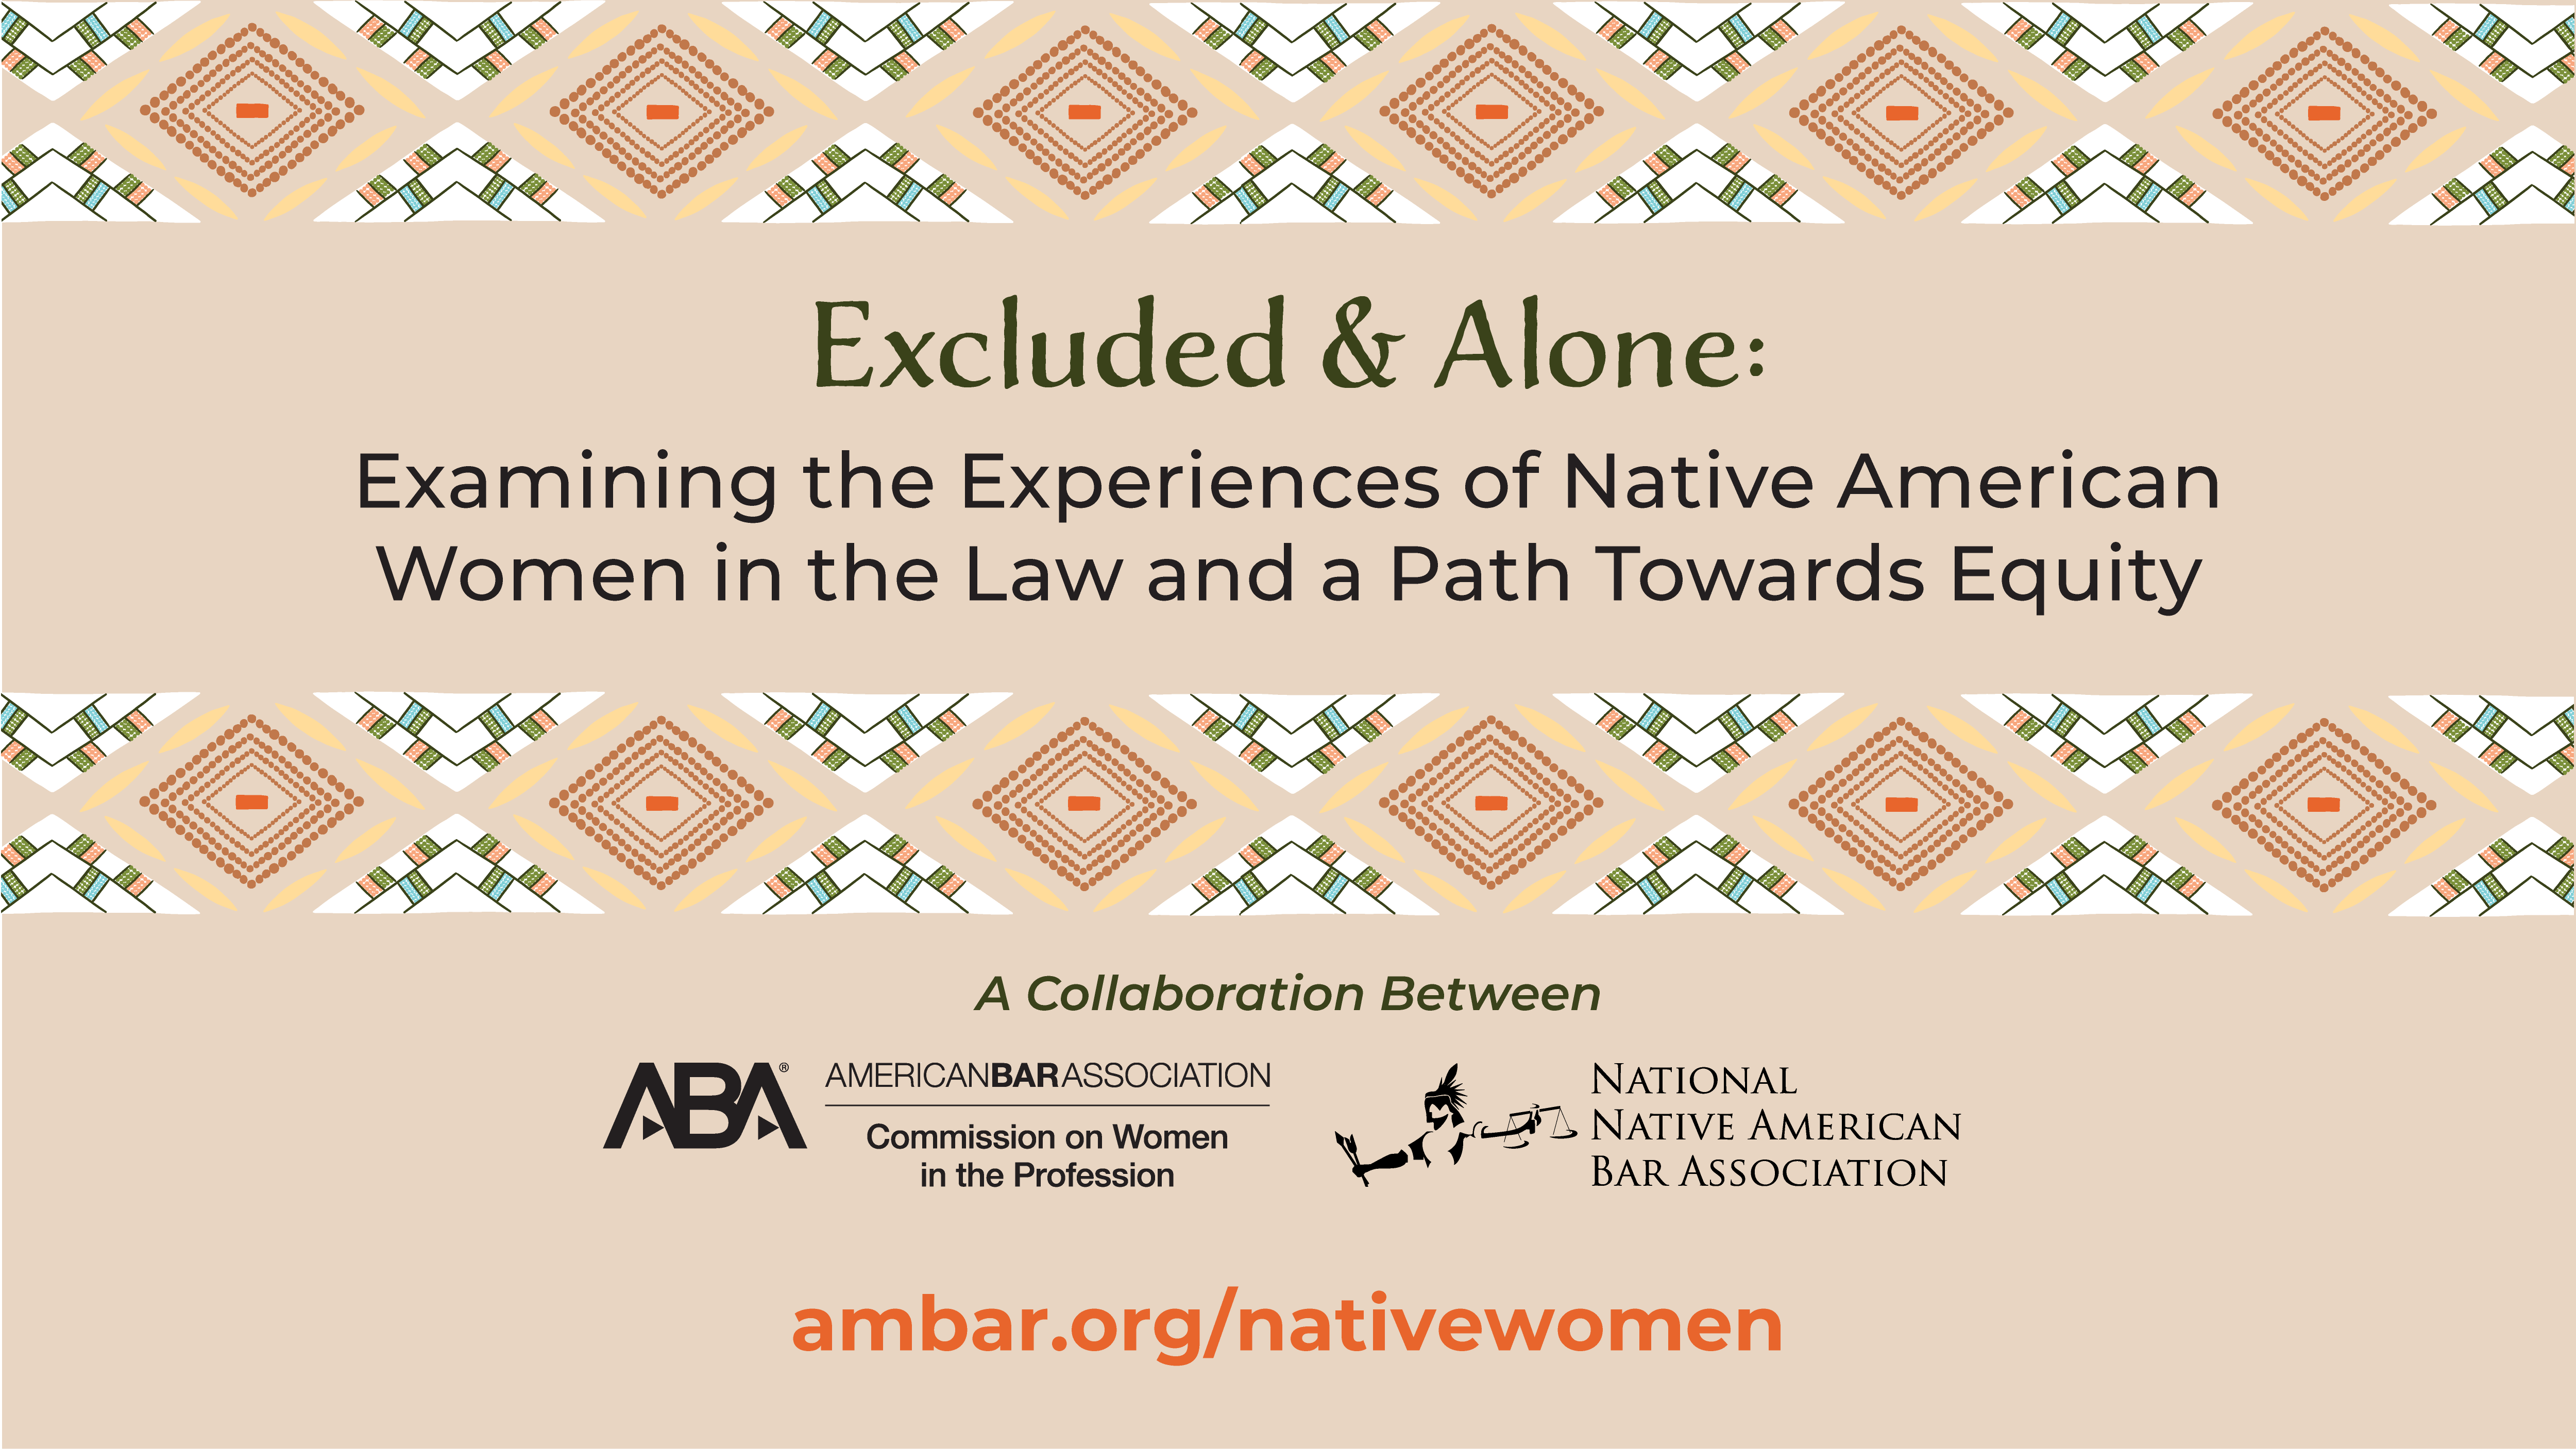 New Study on the Experiences of Native American Women Attorneys